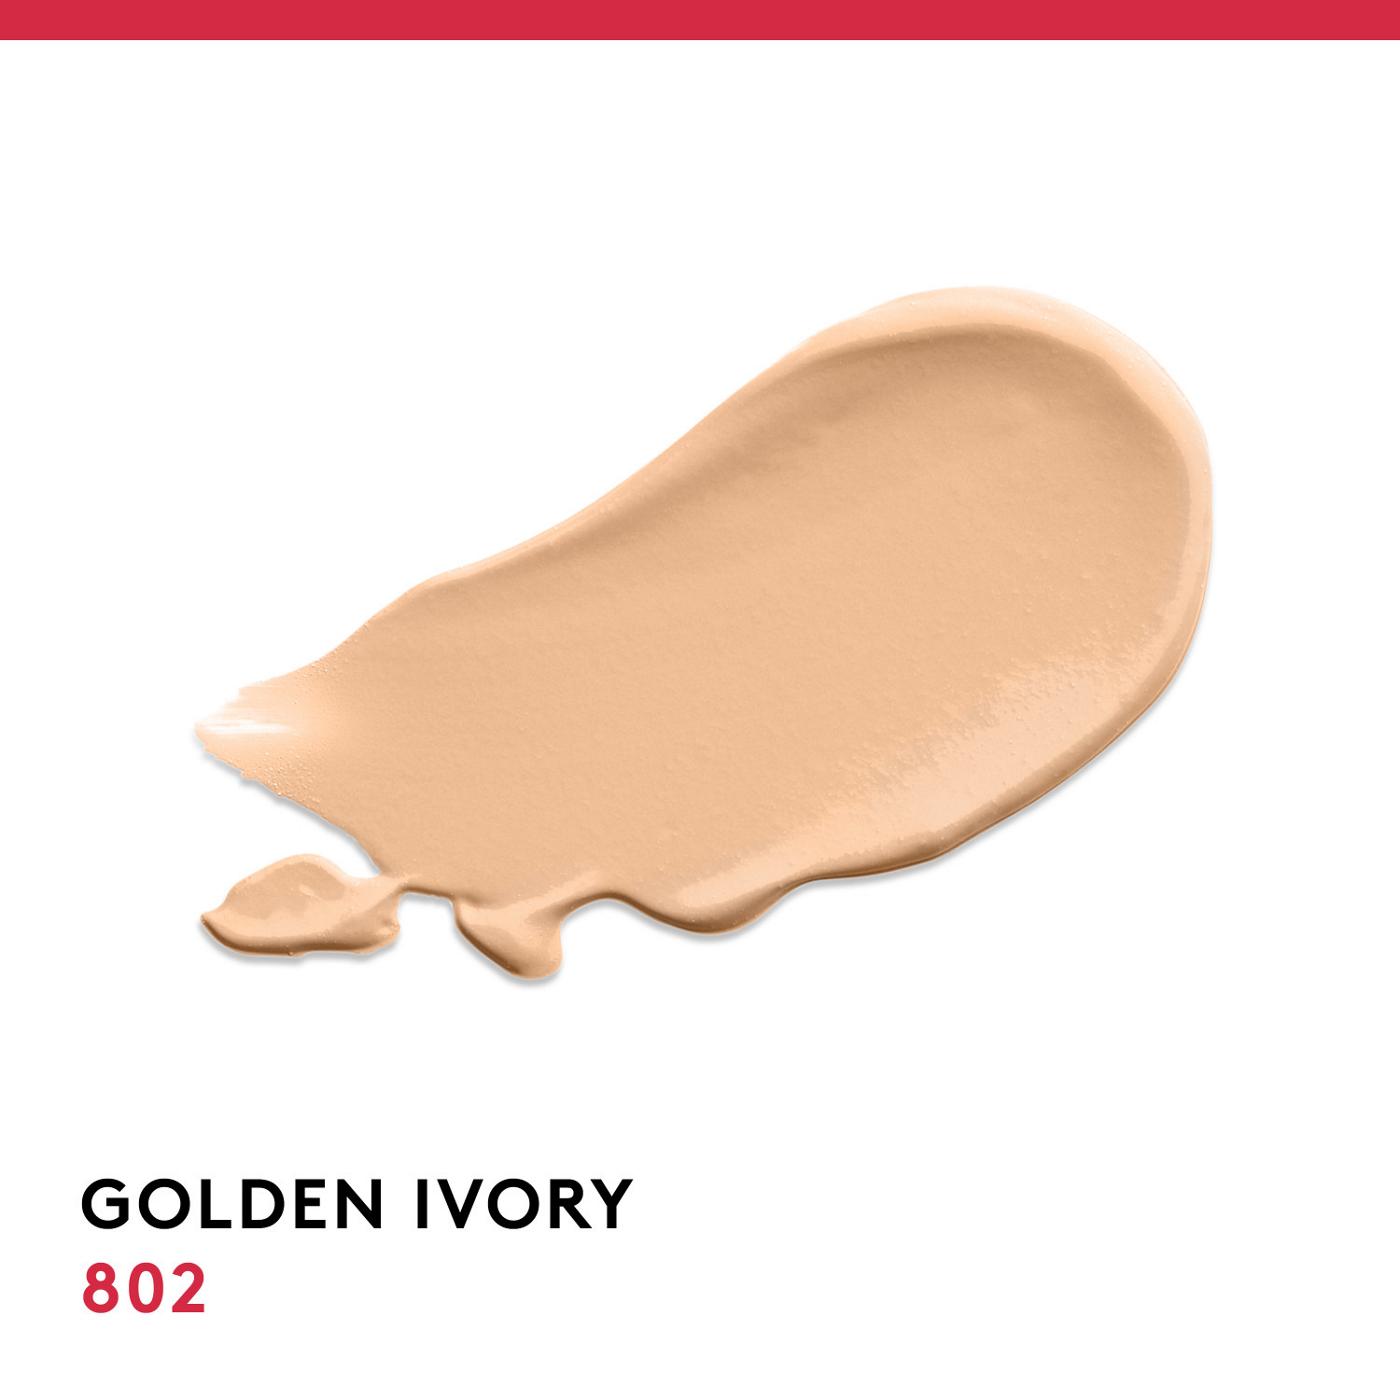 Covergirl Outlast Extreme Wear Liquid Foundation 802 Golden Ivory; image 10 of 11